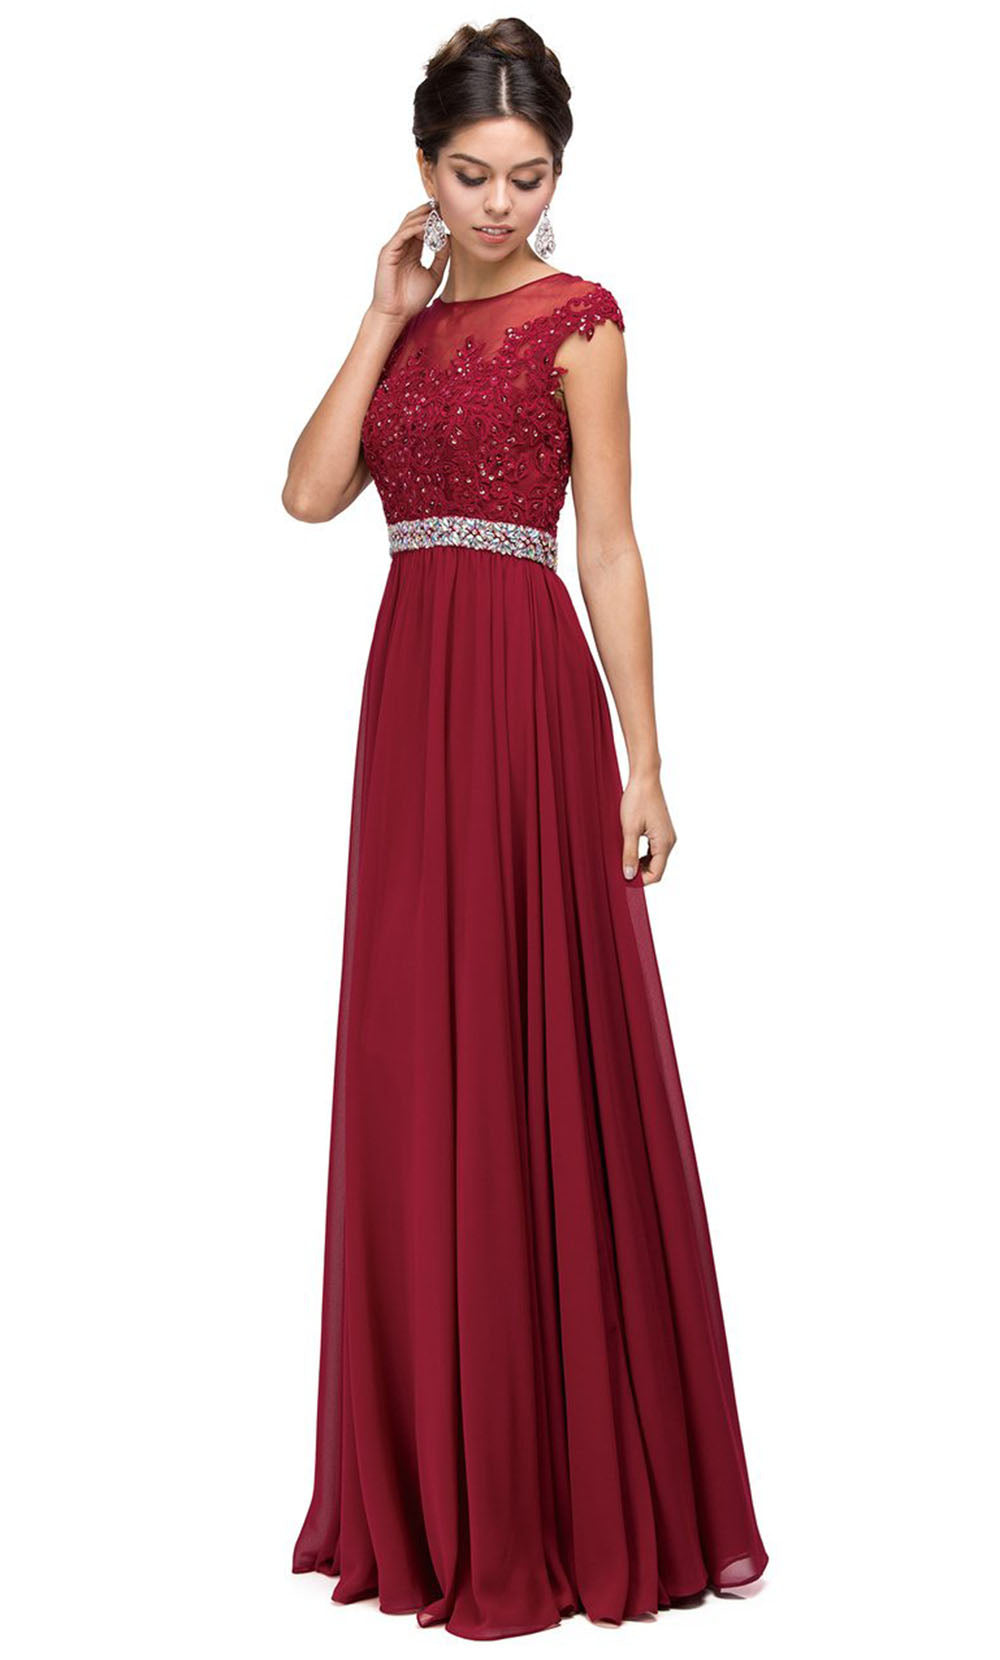 Dancing Queen - 9400 Beaded Lace Illusion Neckline A-Line Gown In Burgundy